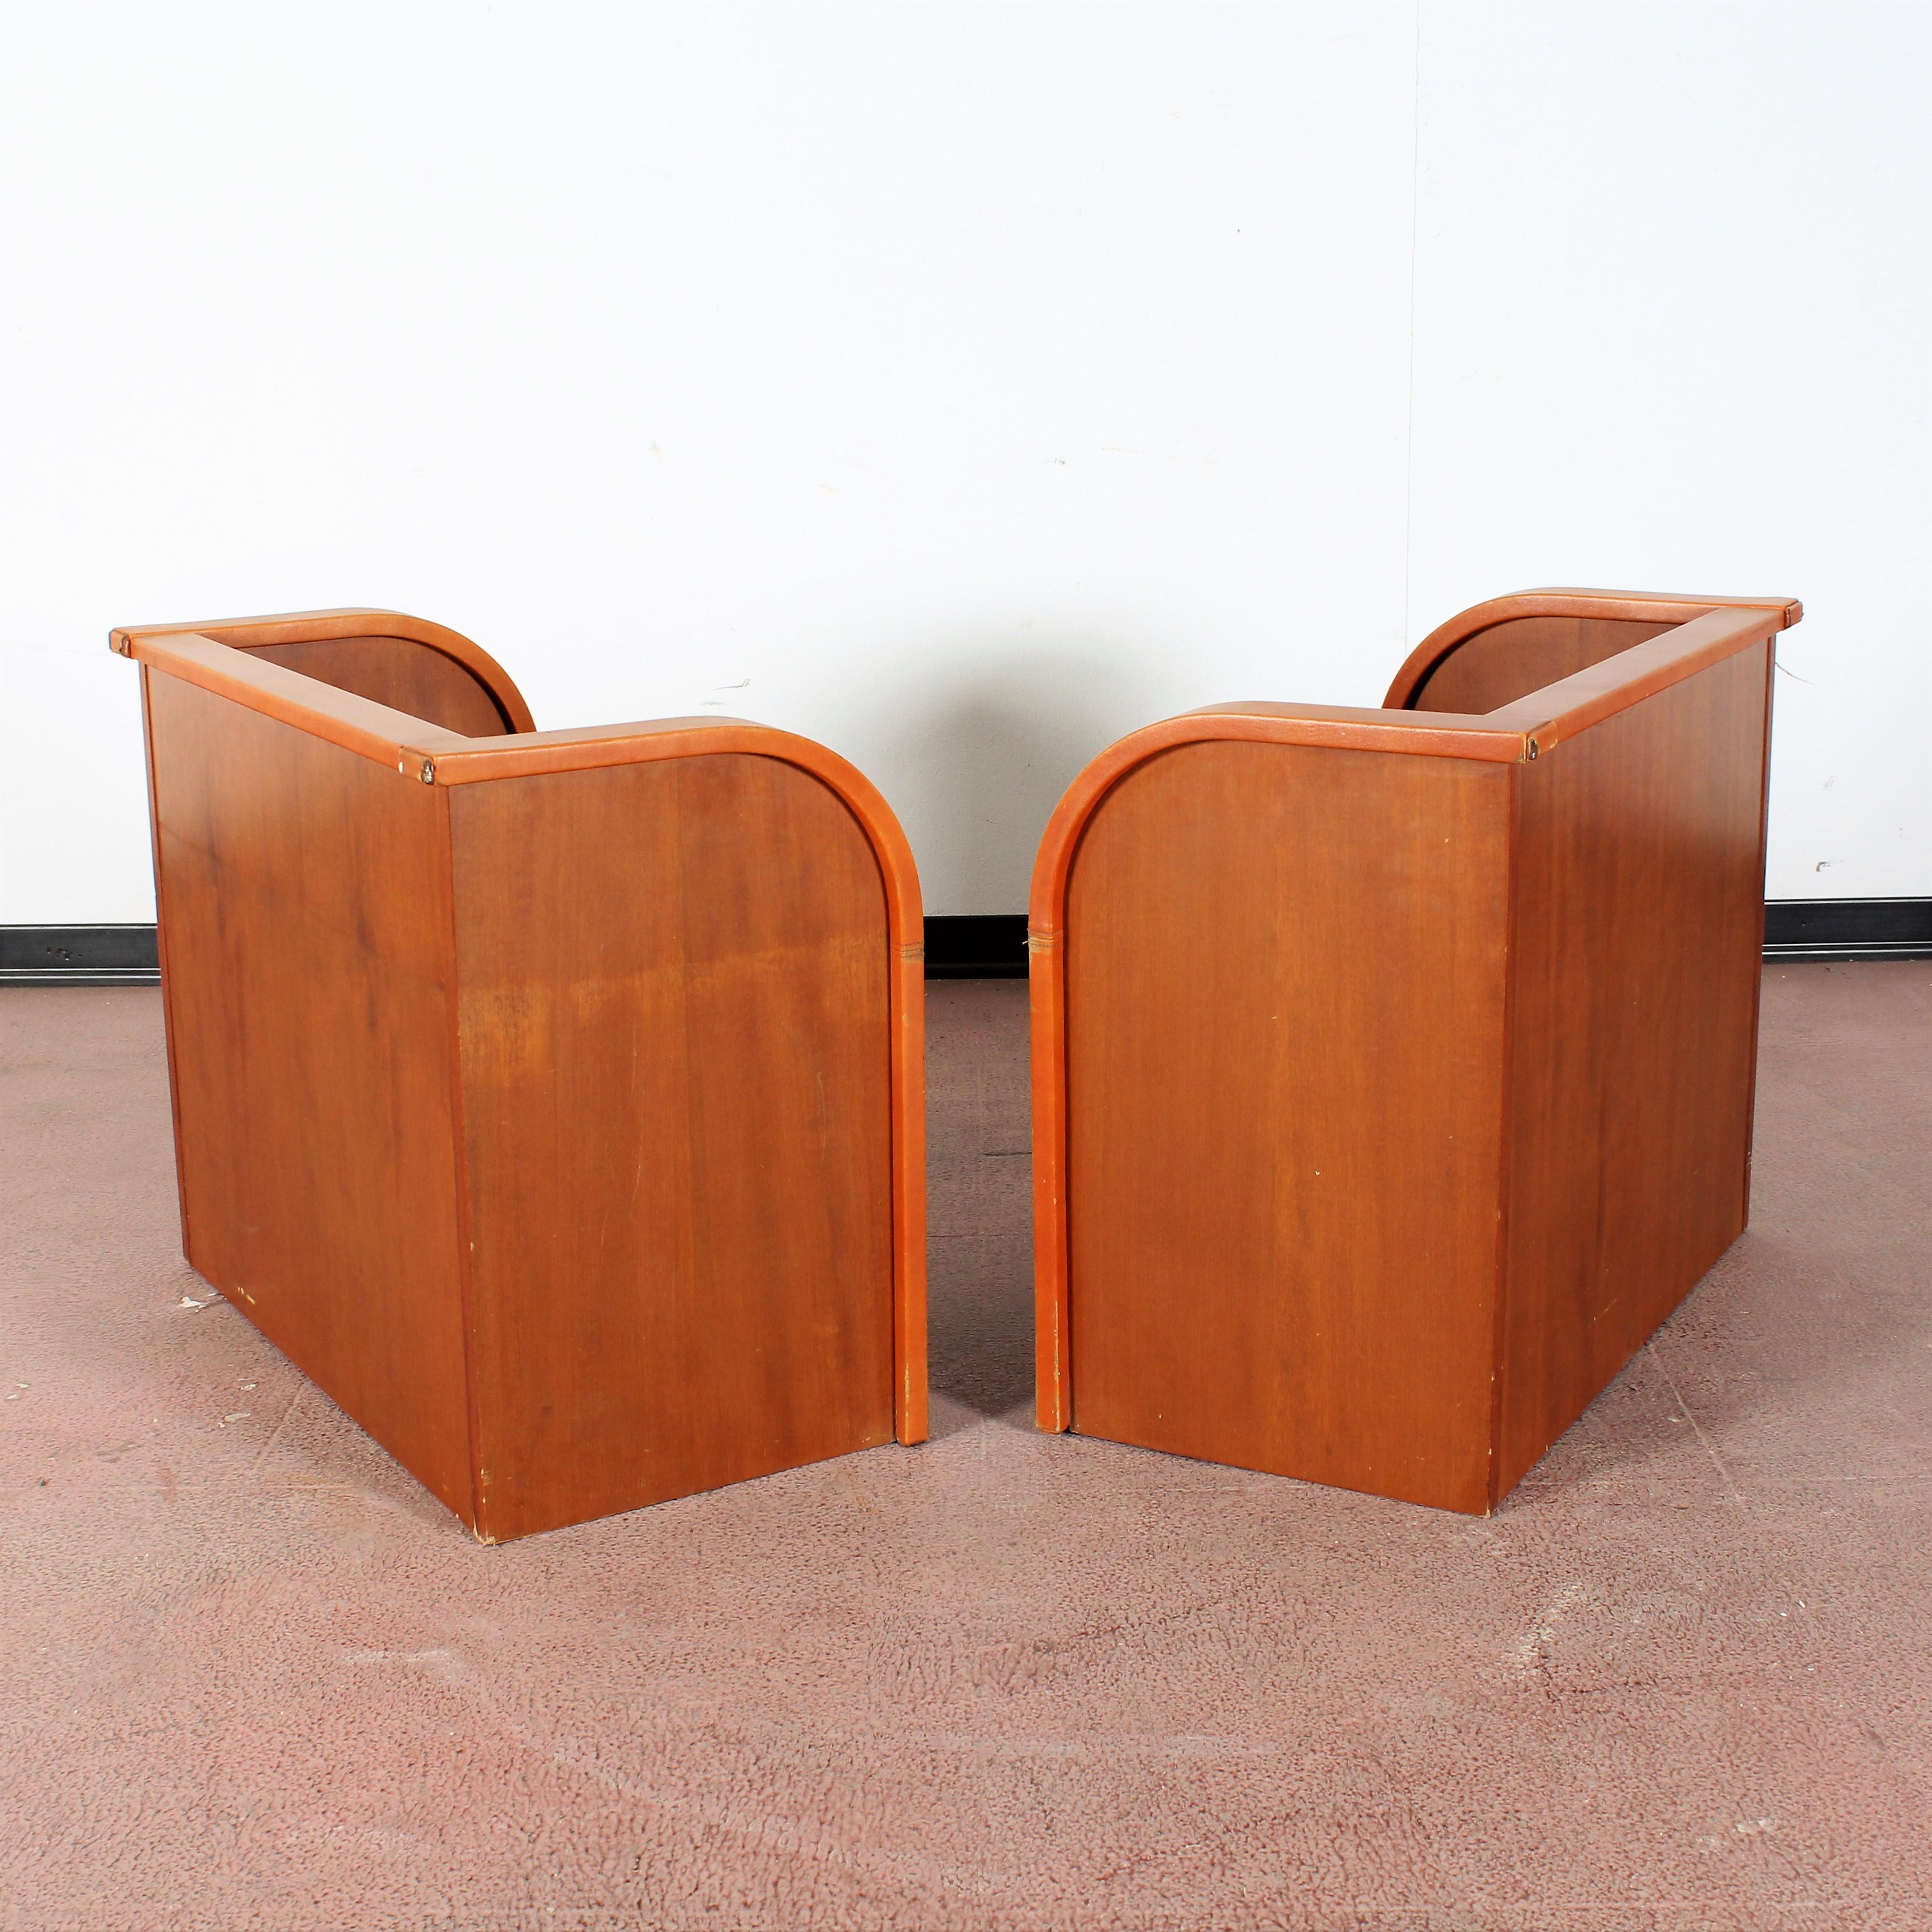 Late 20th Century Midcentury Wood and Leather Poltrona Frau Nightstands, Set of 2, Italy, 1960s